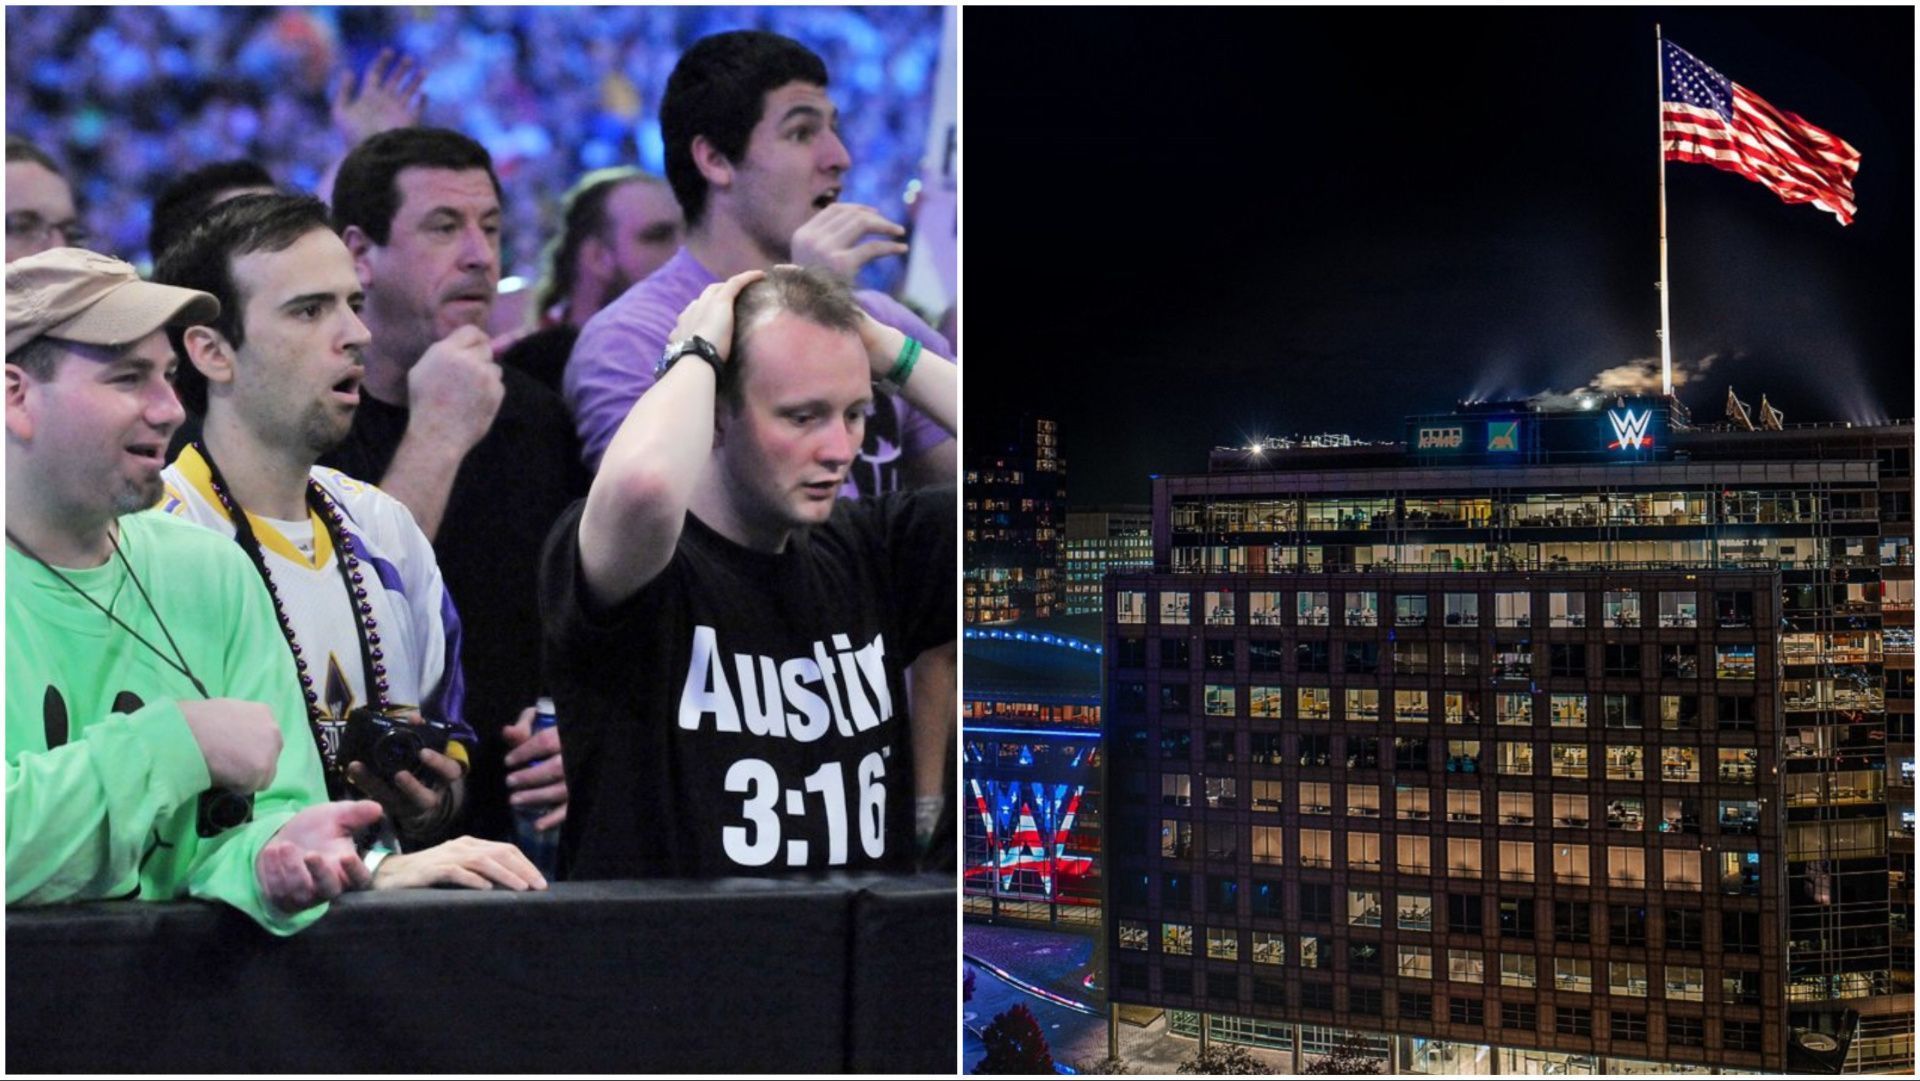 The WWE Universe reacts to in-ring happenings, WWE HQ in Stamford